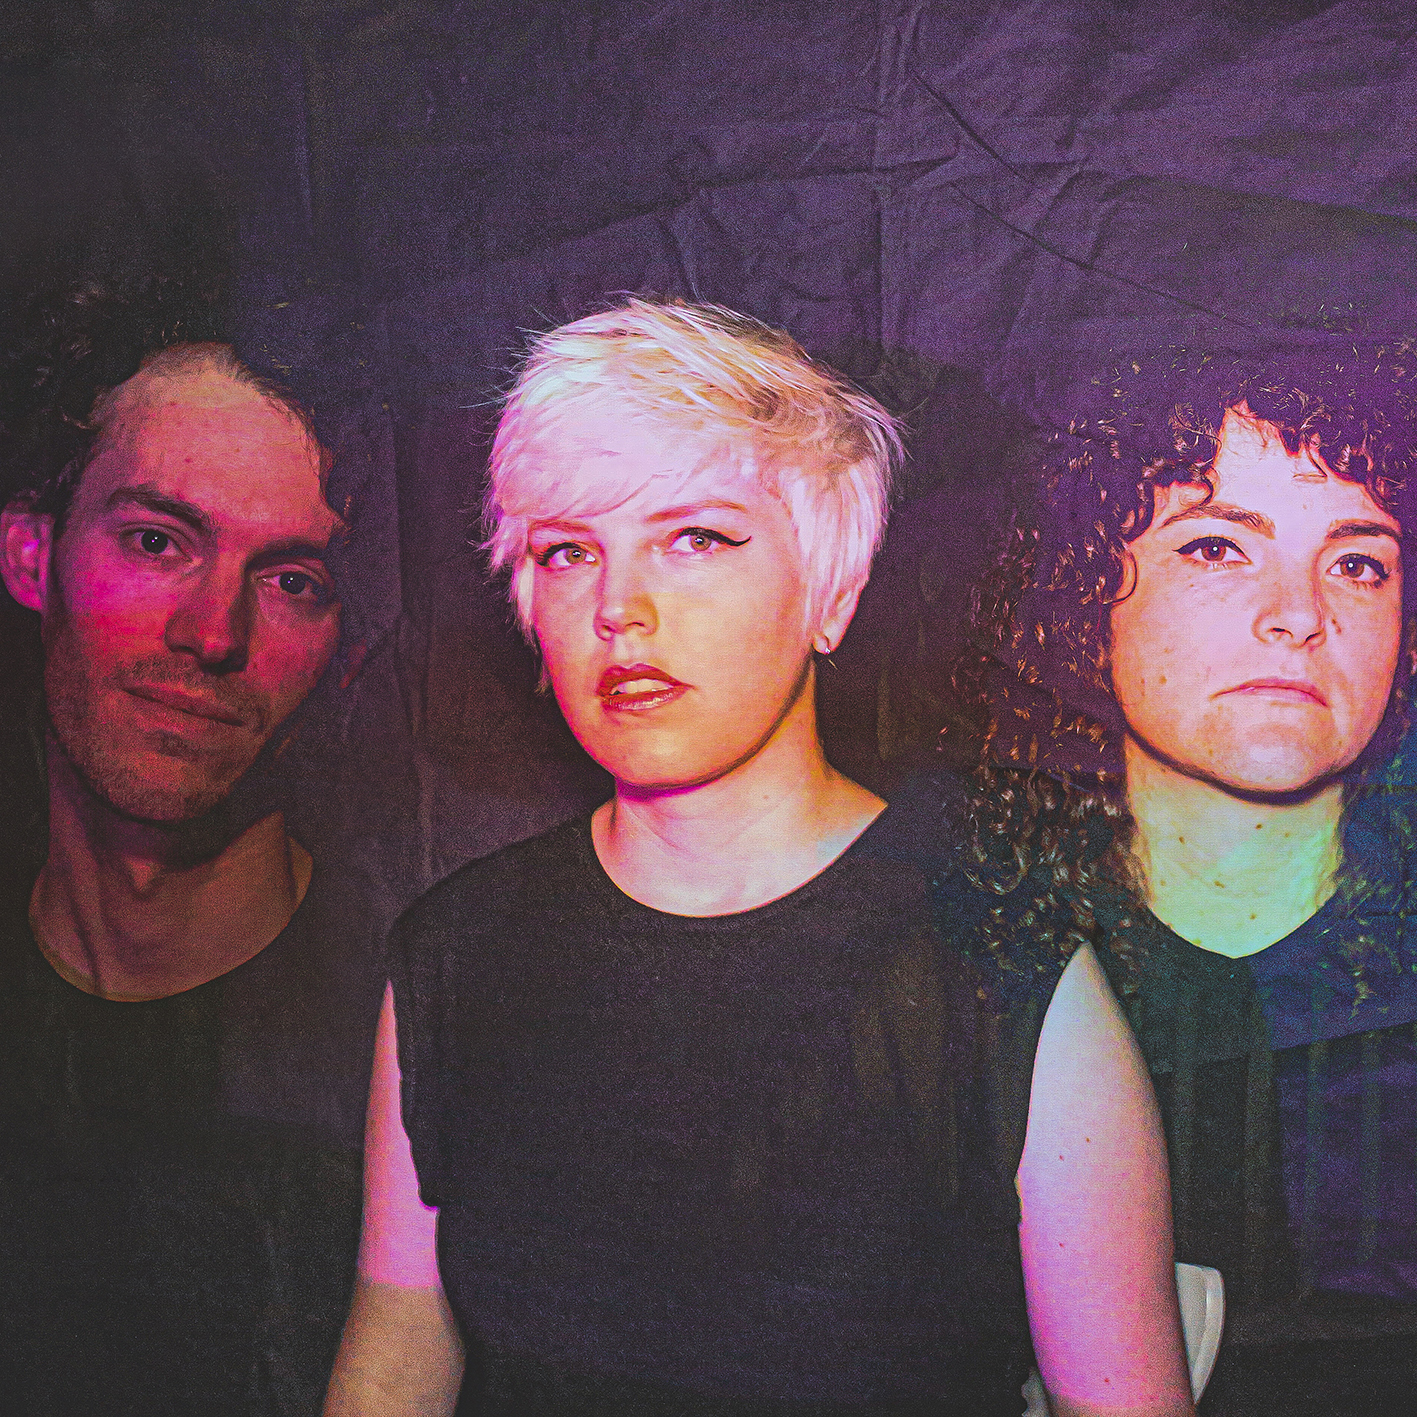 A photo of three musicians with a pink and purple wash over them